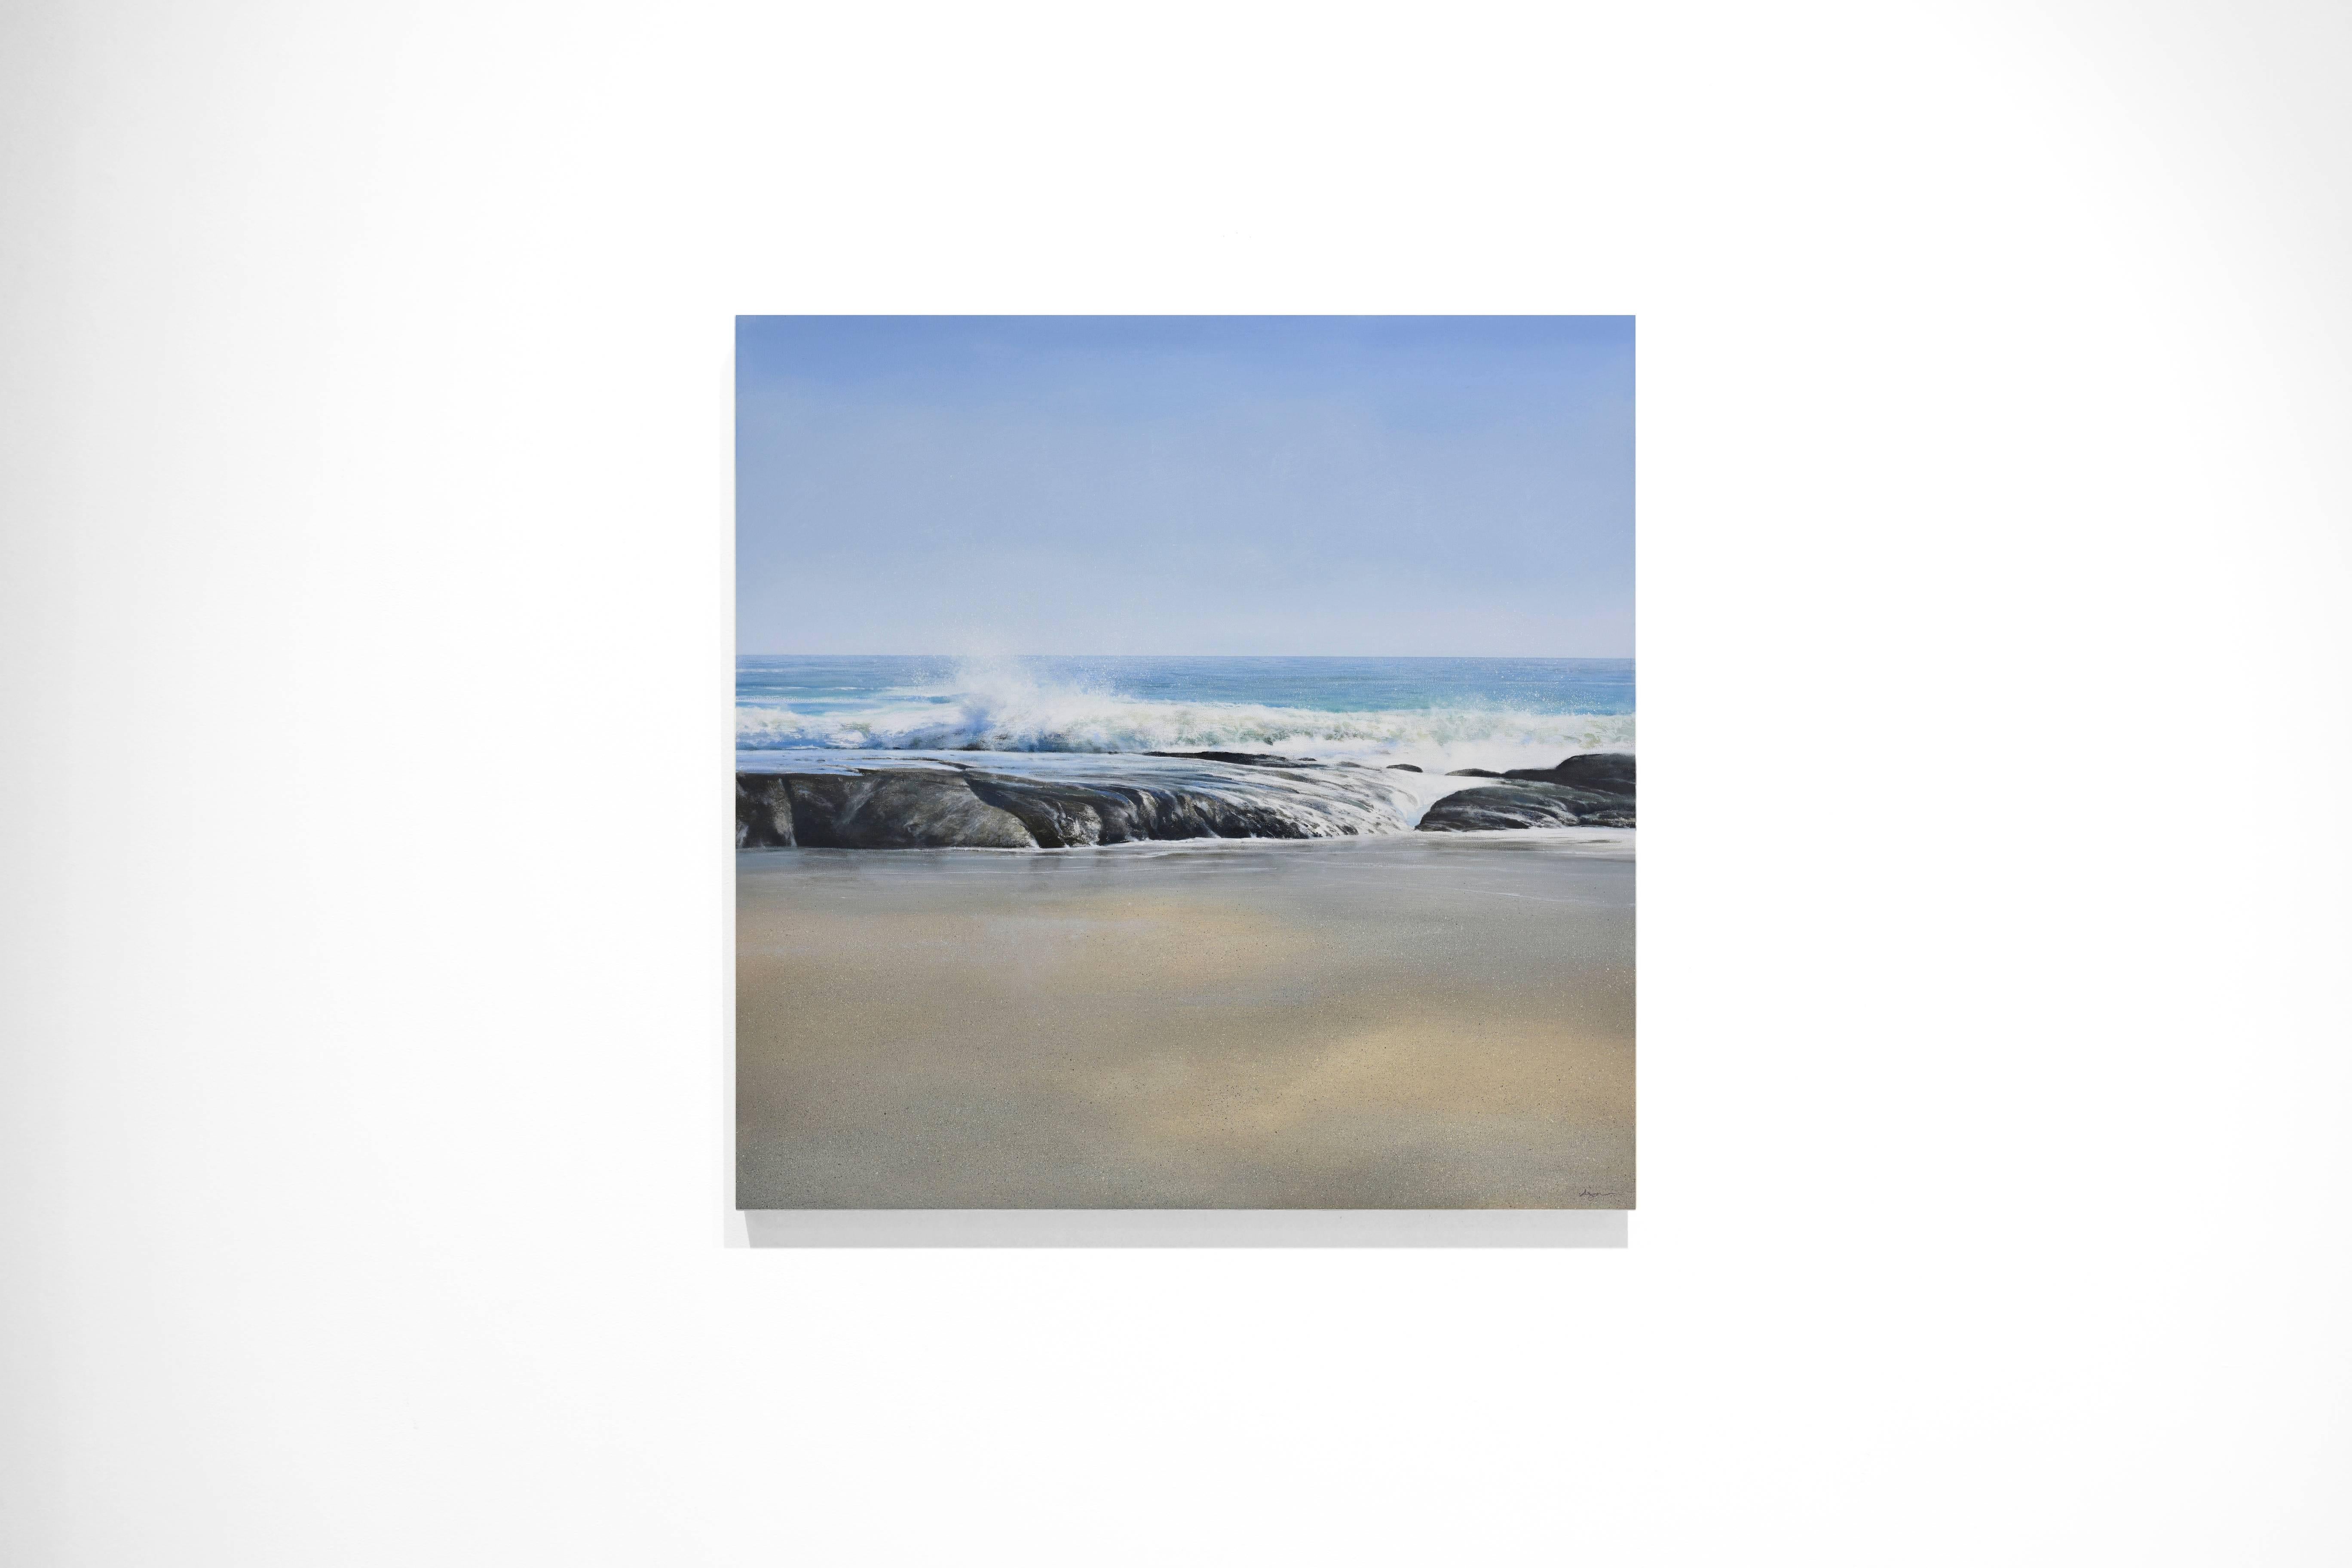 HANA SURF, photo-realistic waterscape, wave hitting the beach, blue, white, sand - Painting by Todd Kenyon